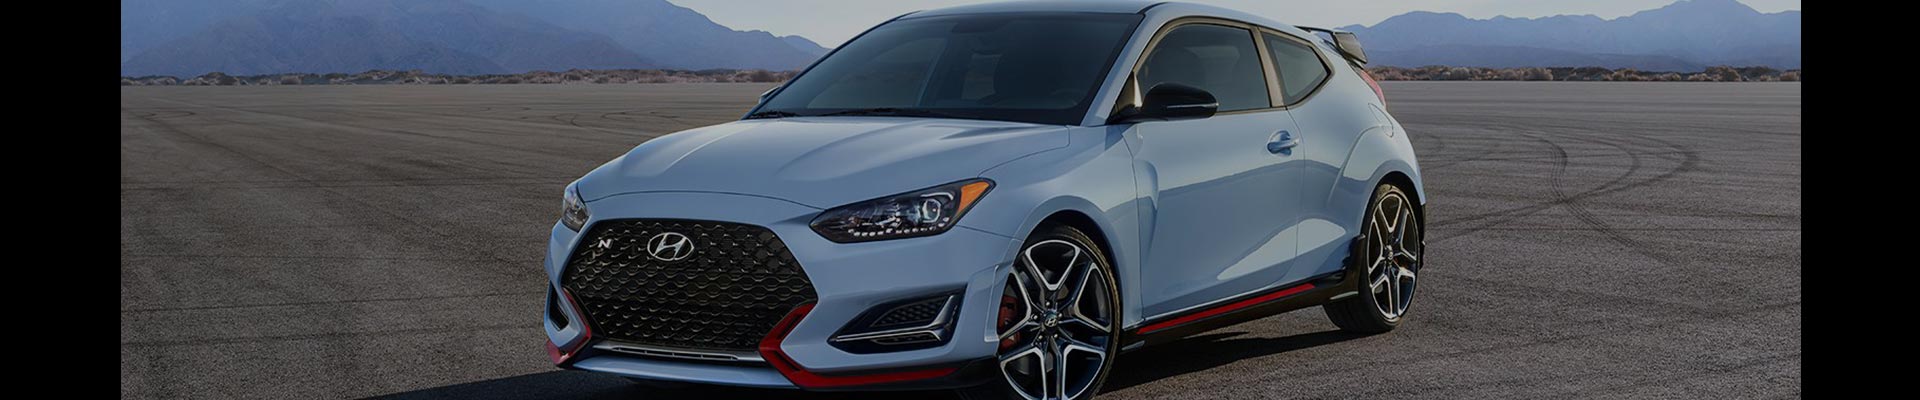 Shop Replacement and OEM 2020 Hyundai Veloster N Parts with Discounted Price on the Net